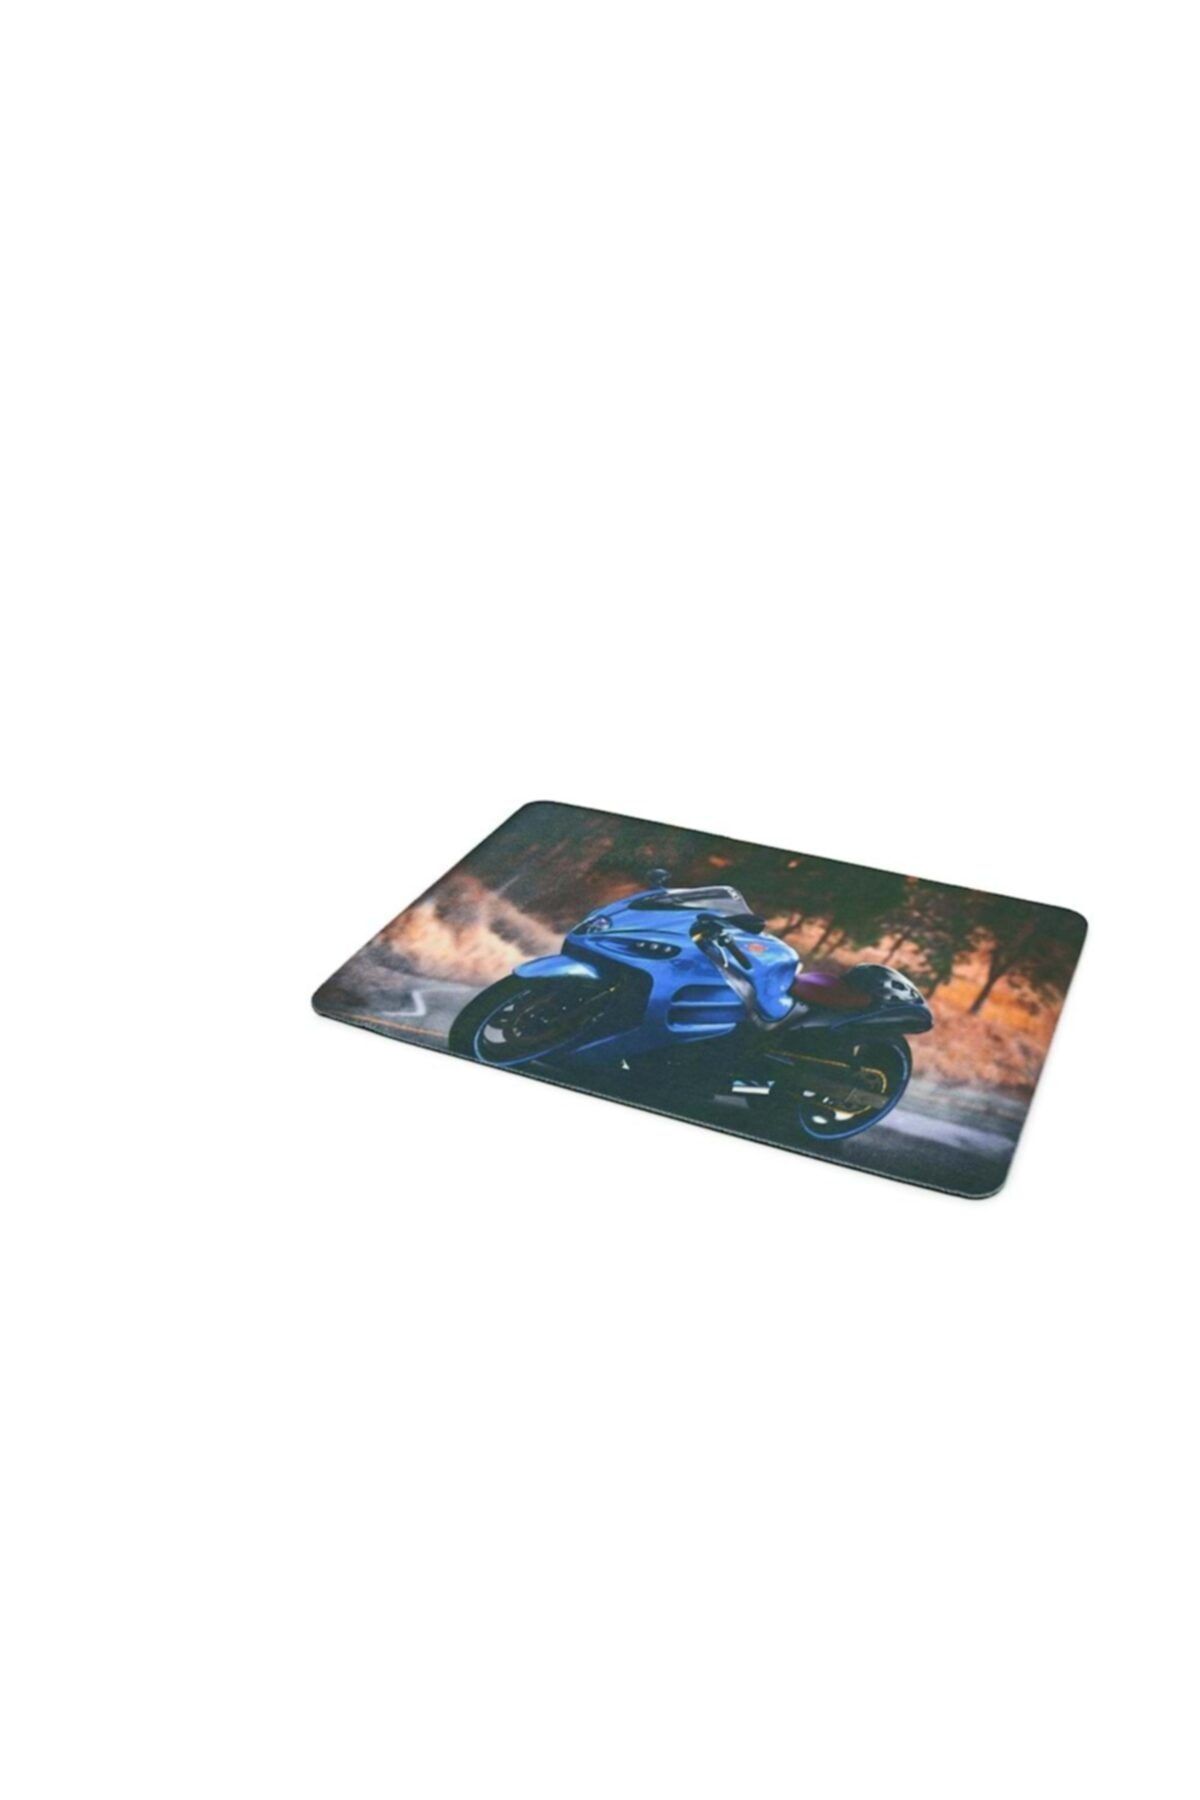 HADRON Hd5531dd Mouse Pad 170*230mm